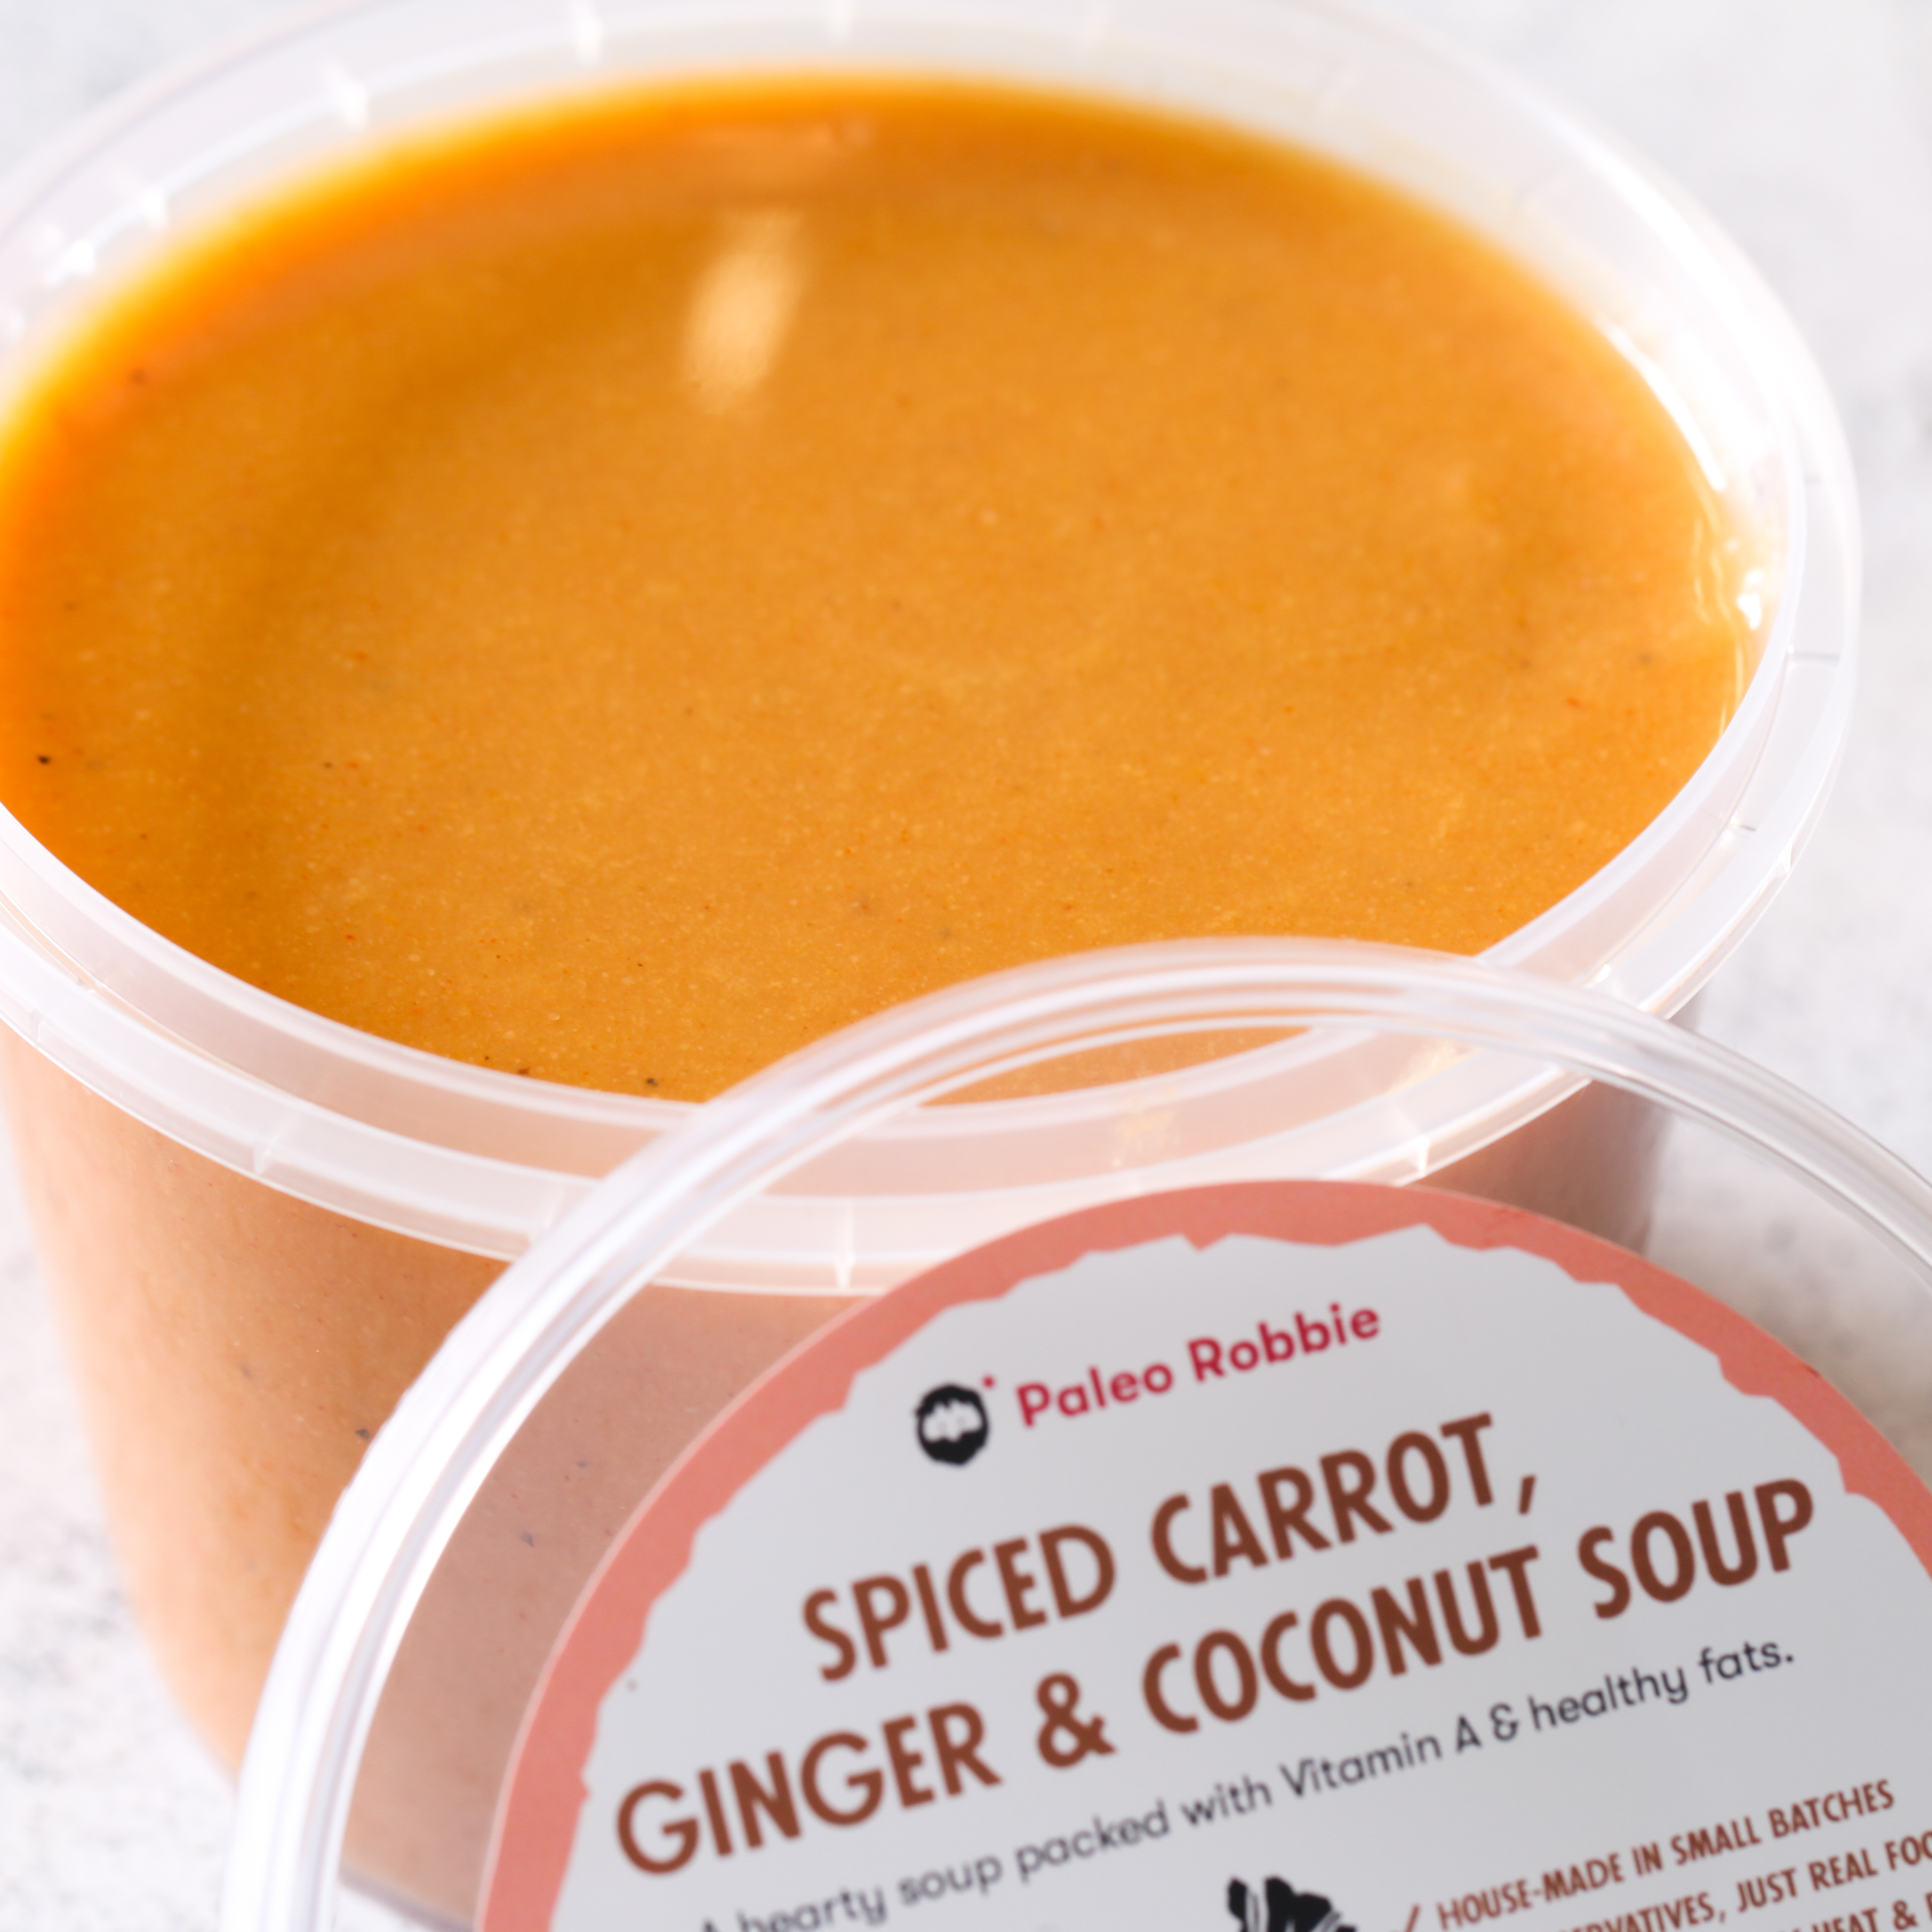 Spiced Carrot, Ginger & Coconut Soup (large) 500ml